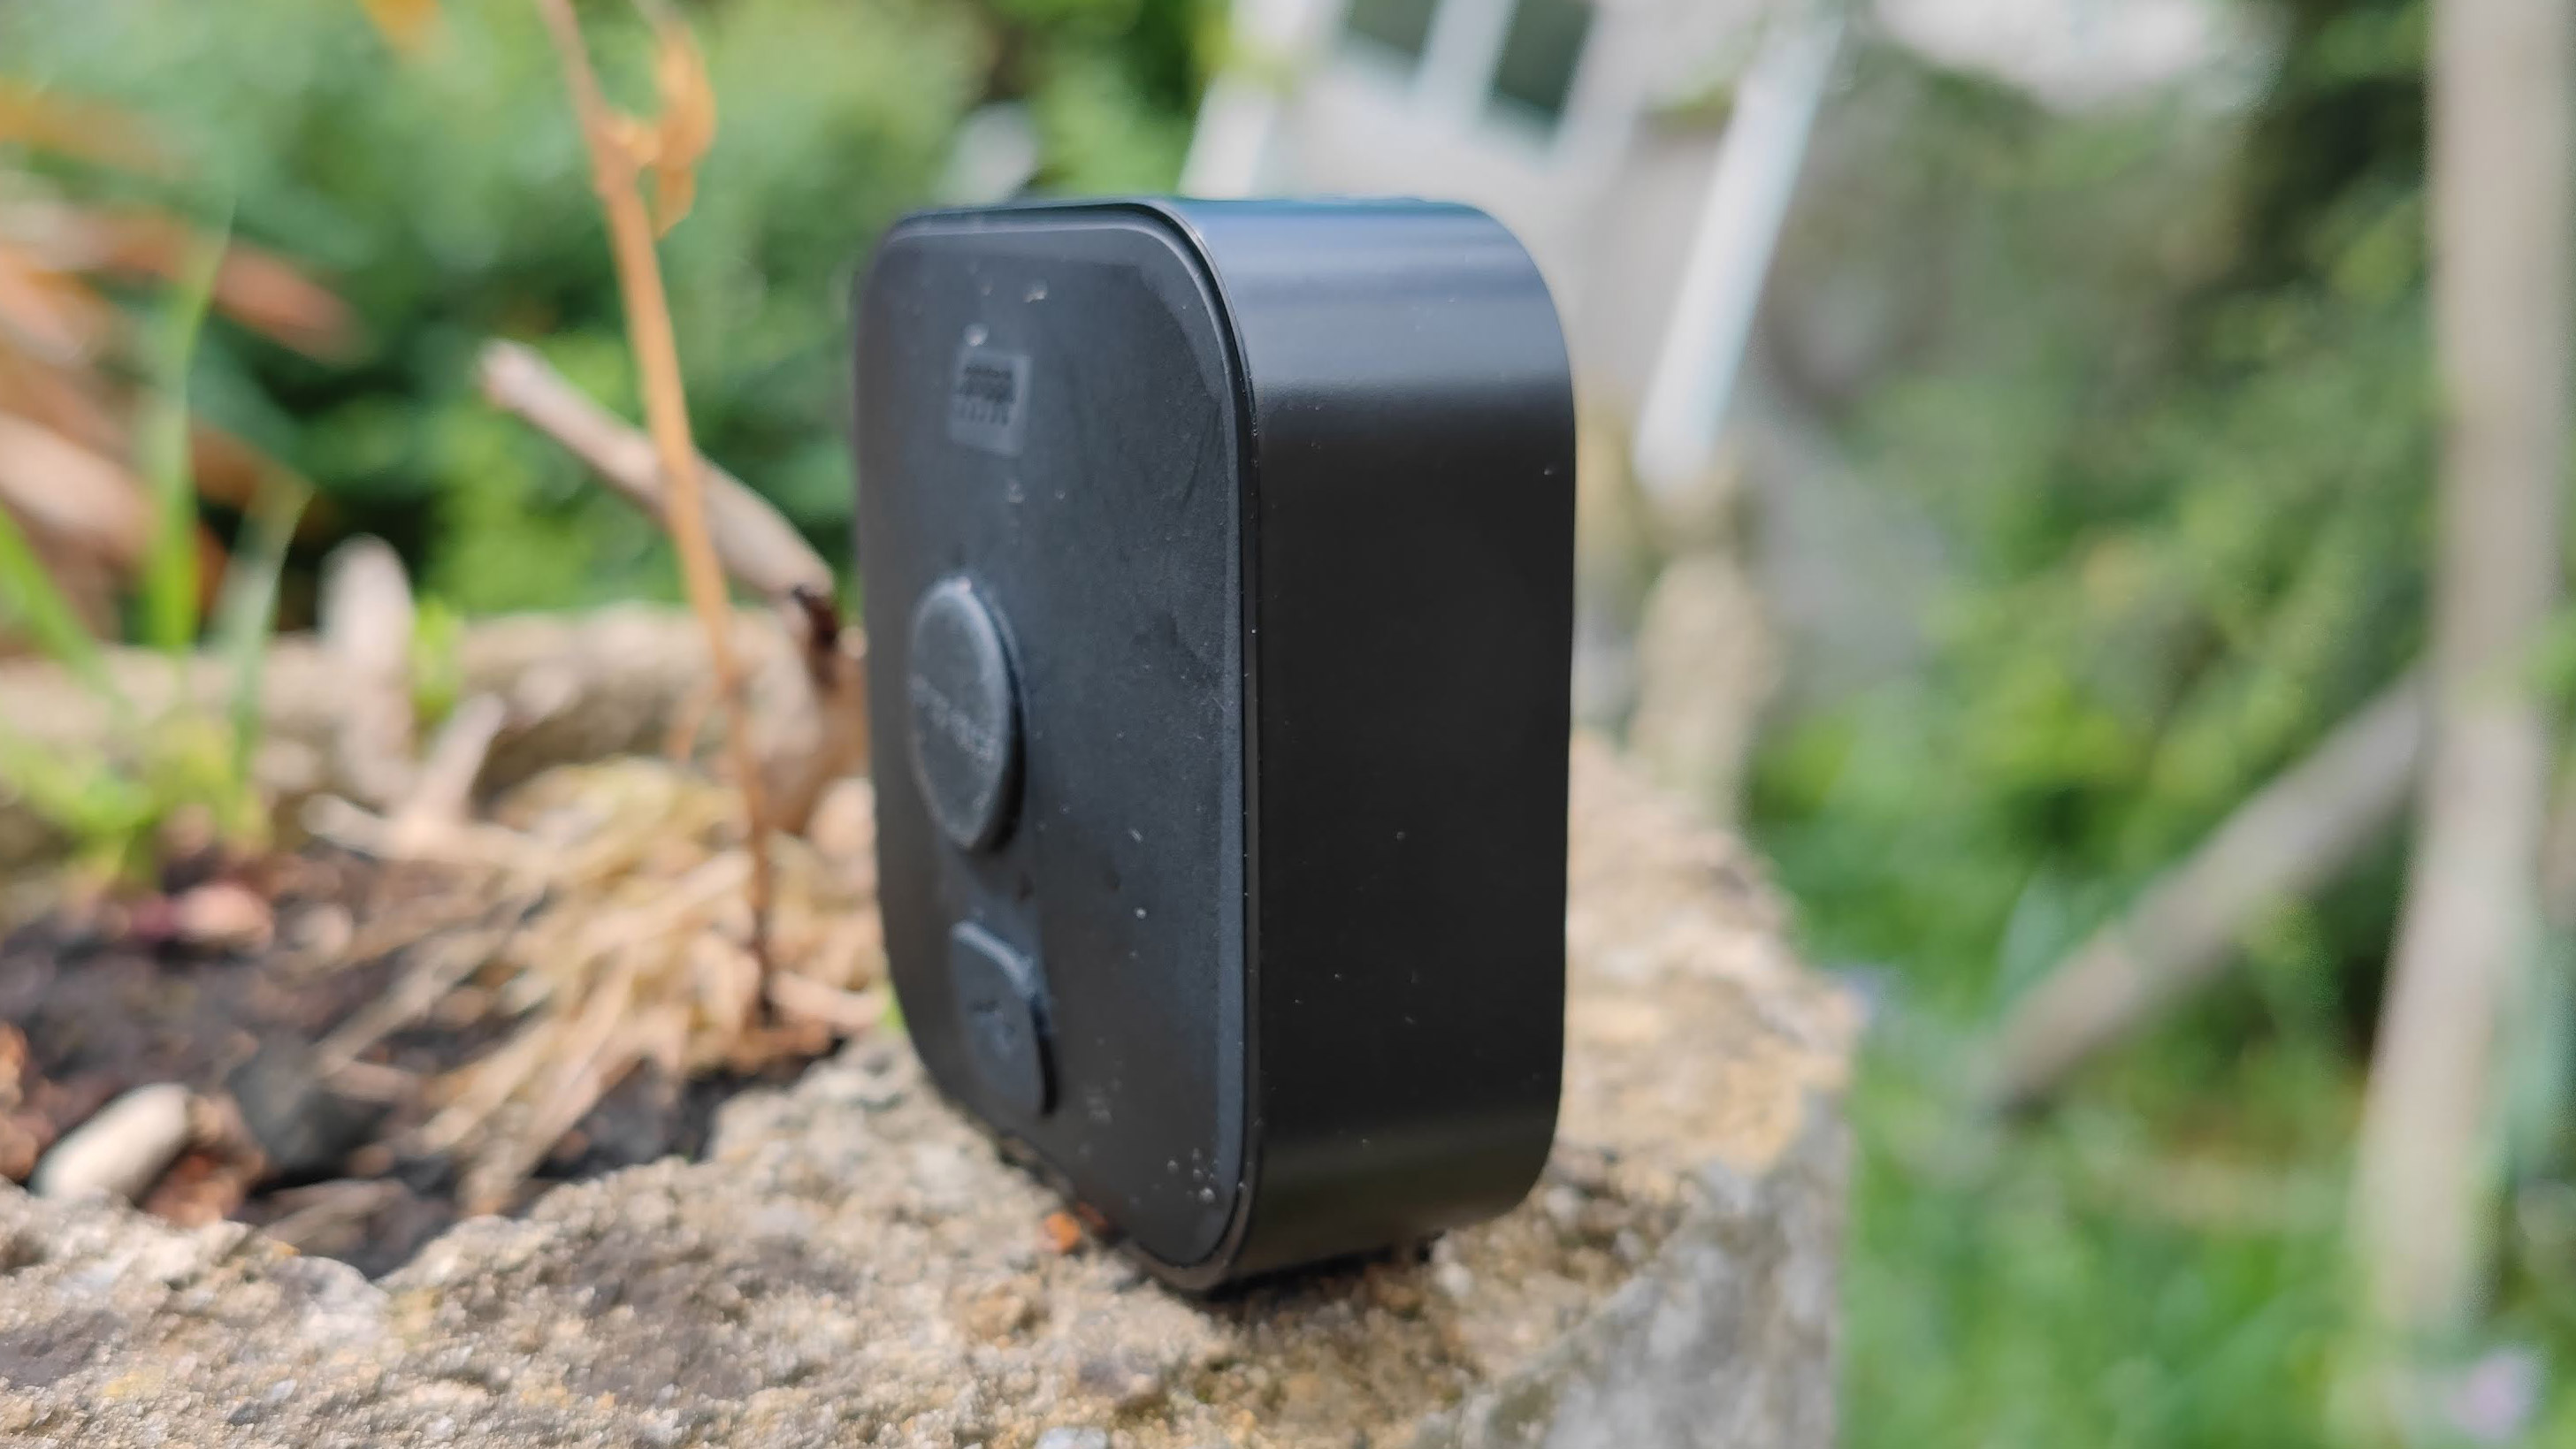 The side view of the Blink Outdoor security camera